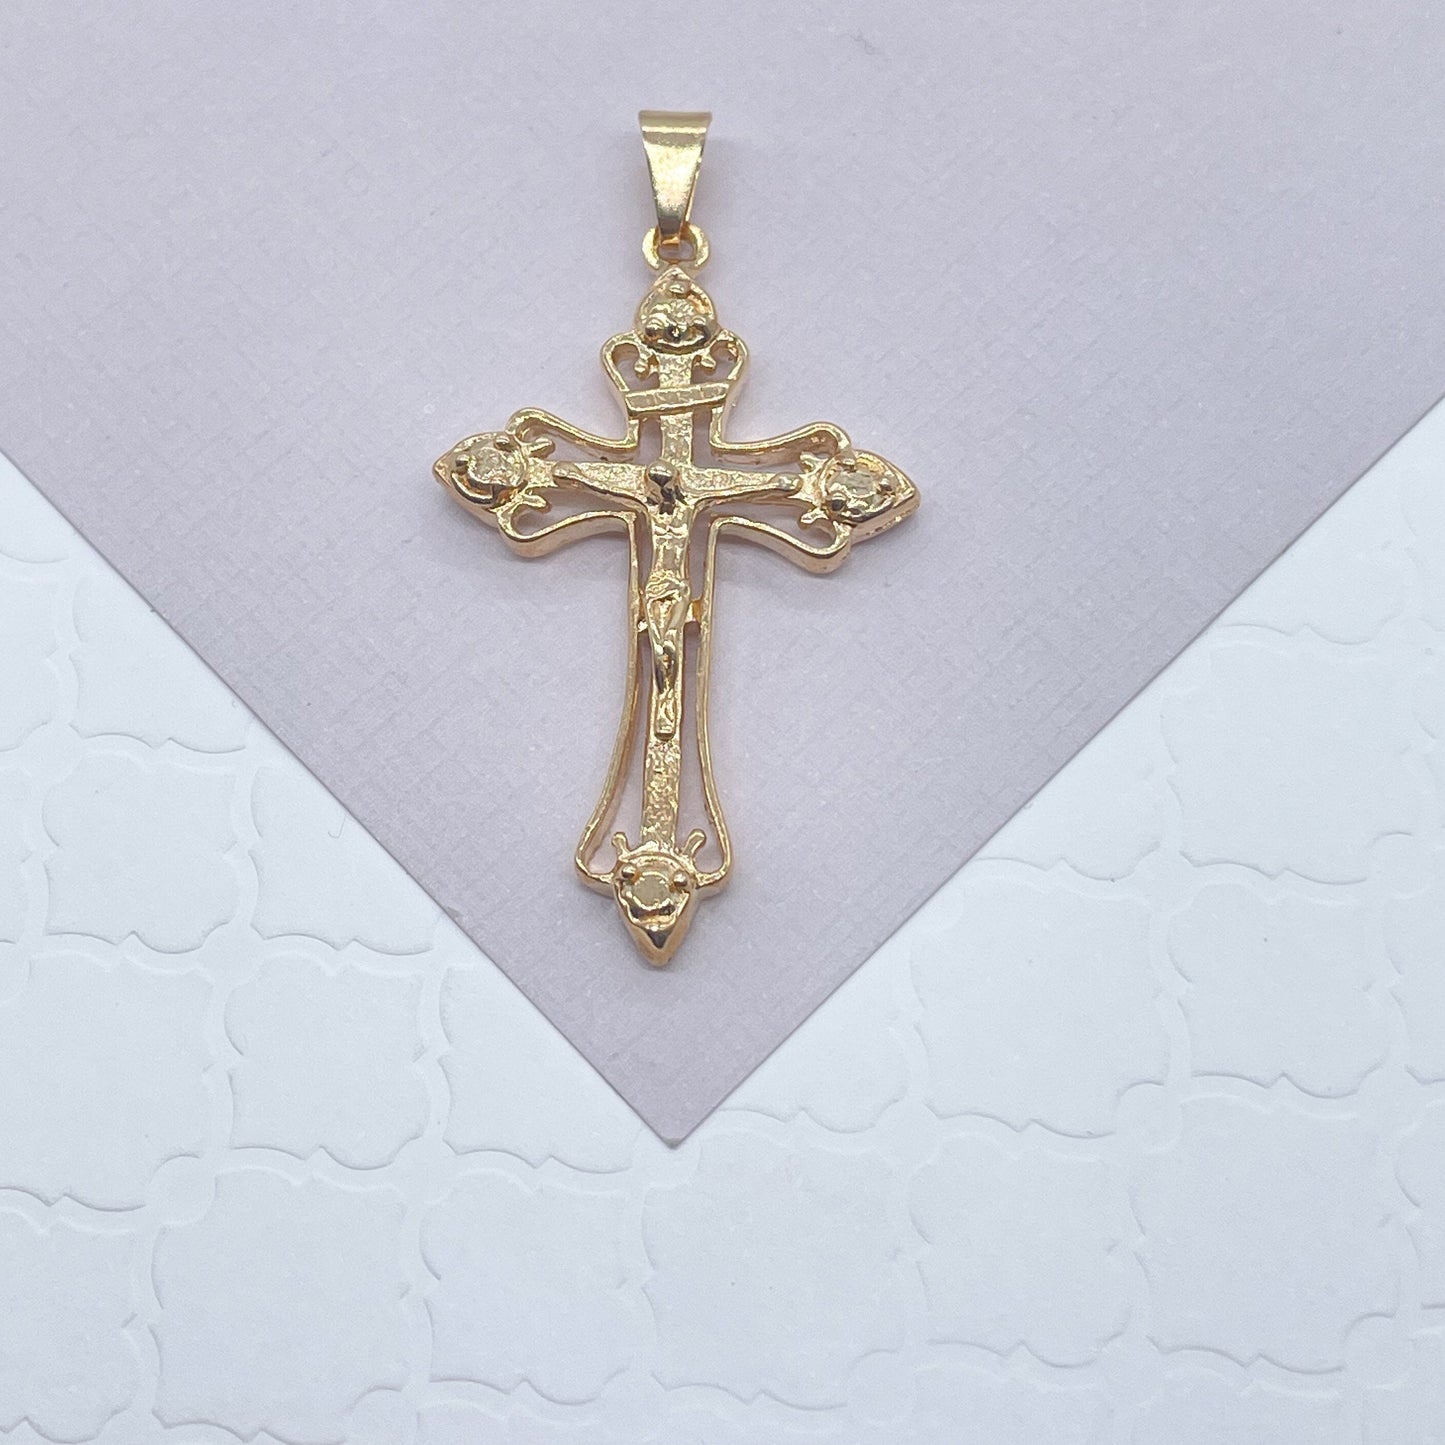 18k Gold Layered 1.7” Crucifix Cross Pendant Charm with Christ Image, Religious